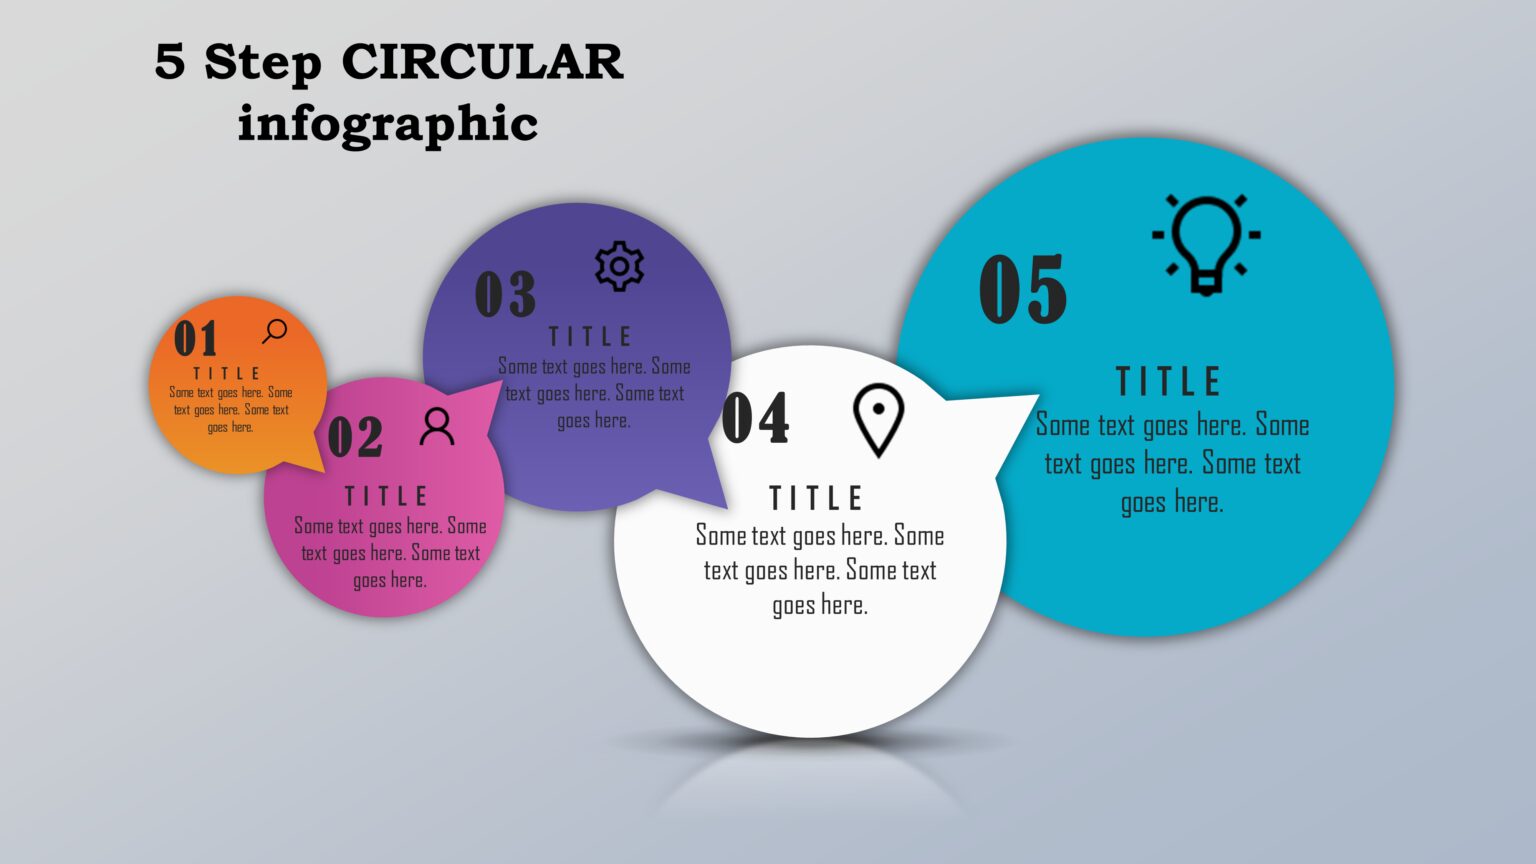 17powerpoint 5 Step Circular Infographic Powerup With Powerpoint 1752